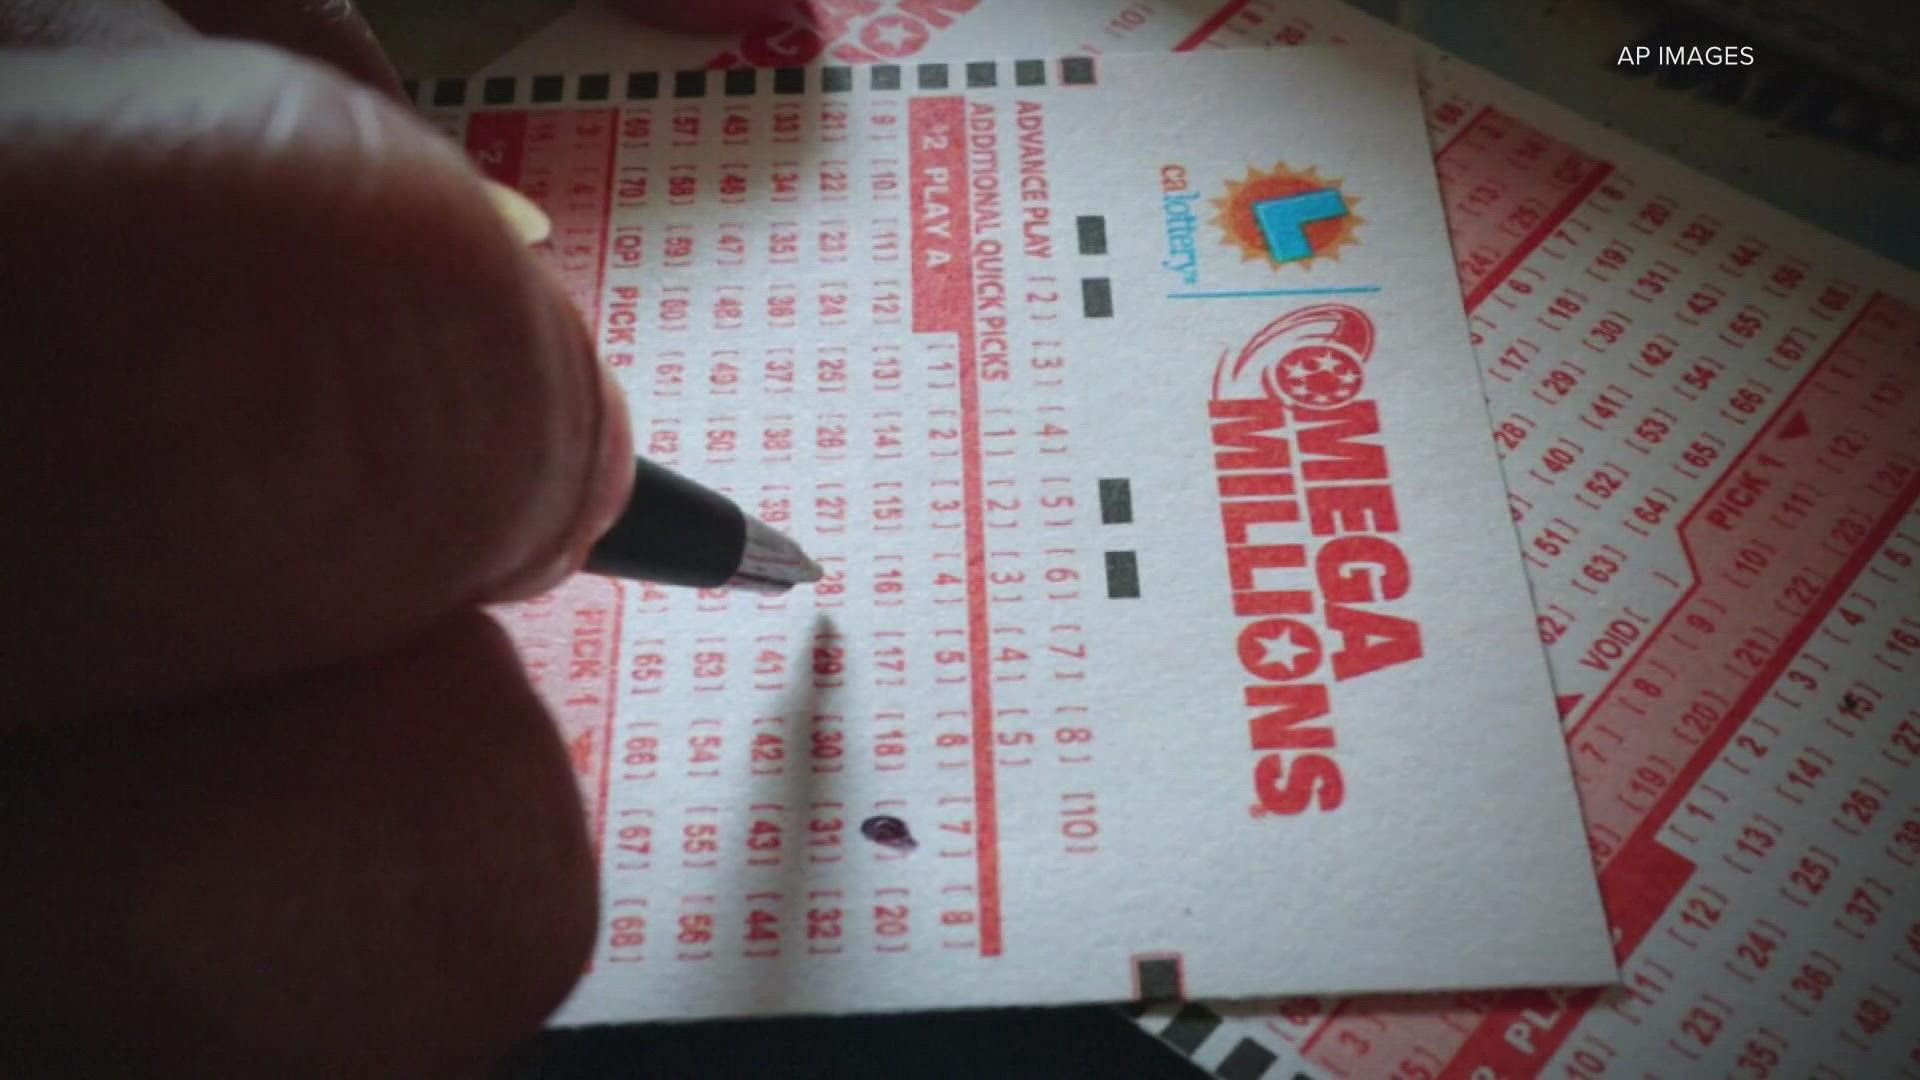 Friday's drawing will be the fifth highest in Mega Millions history. The highest ever was more than $1.5 billion in 2018.